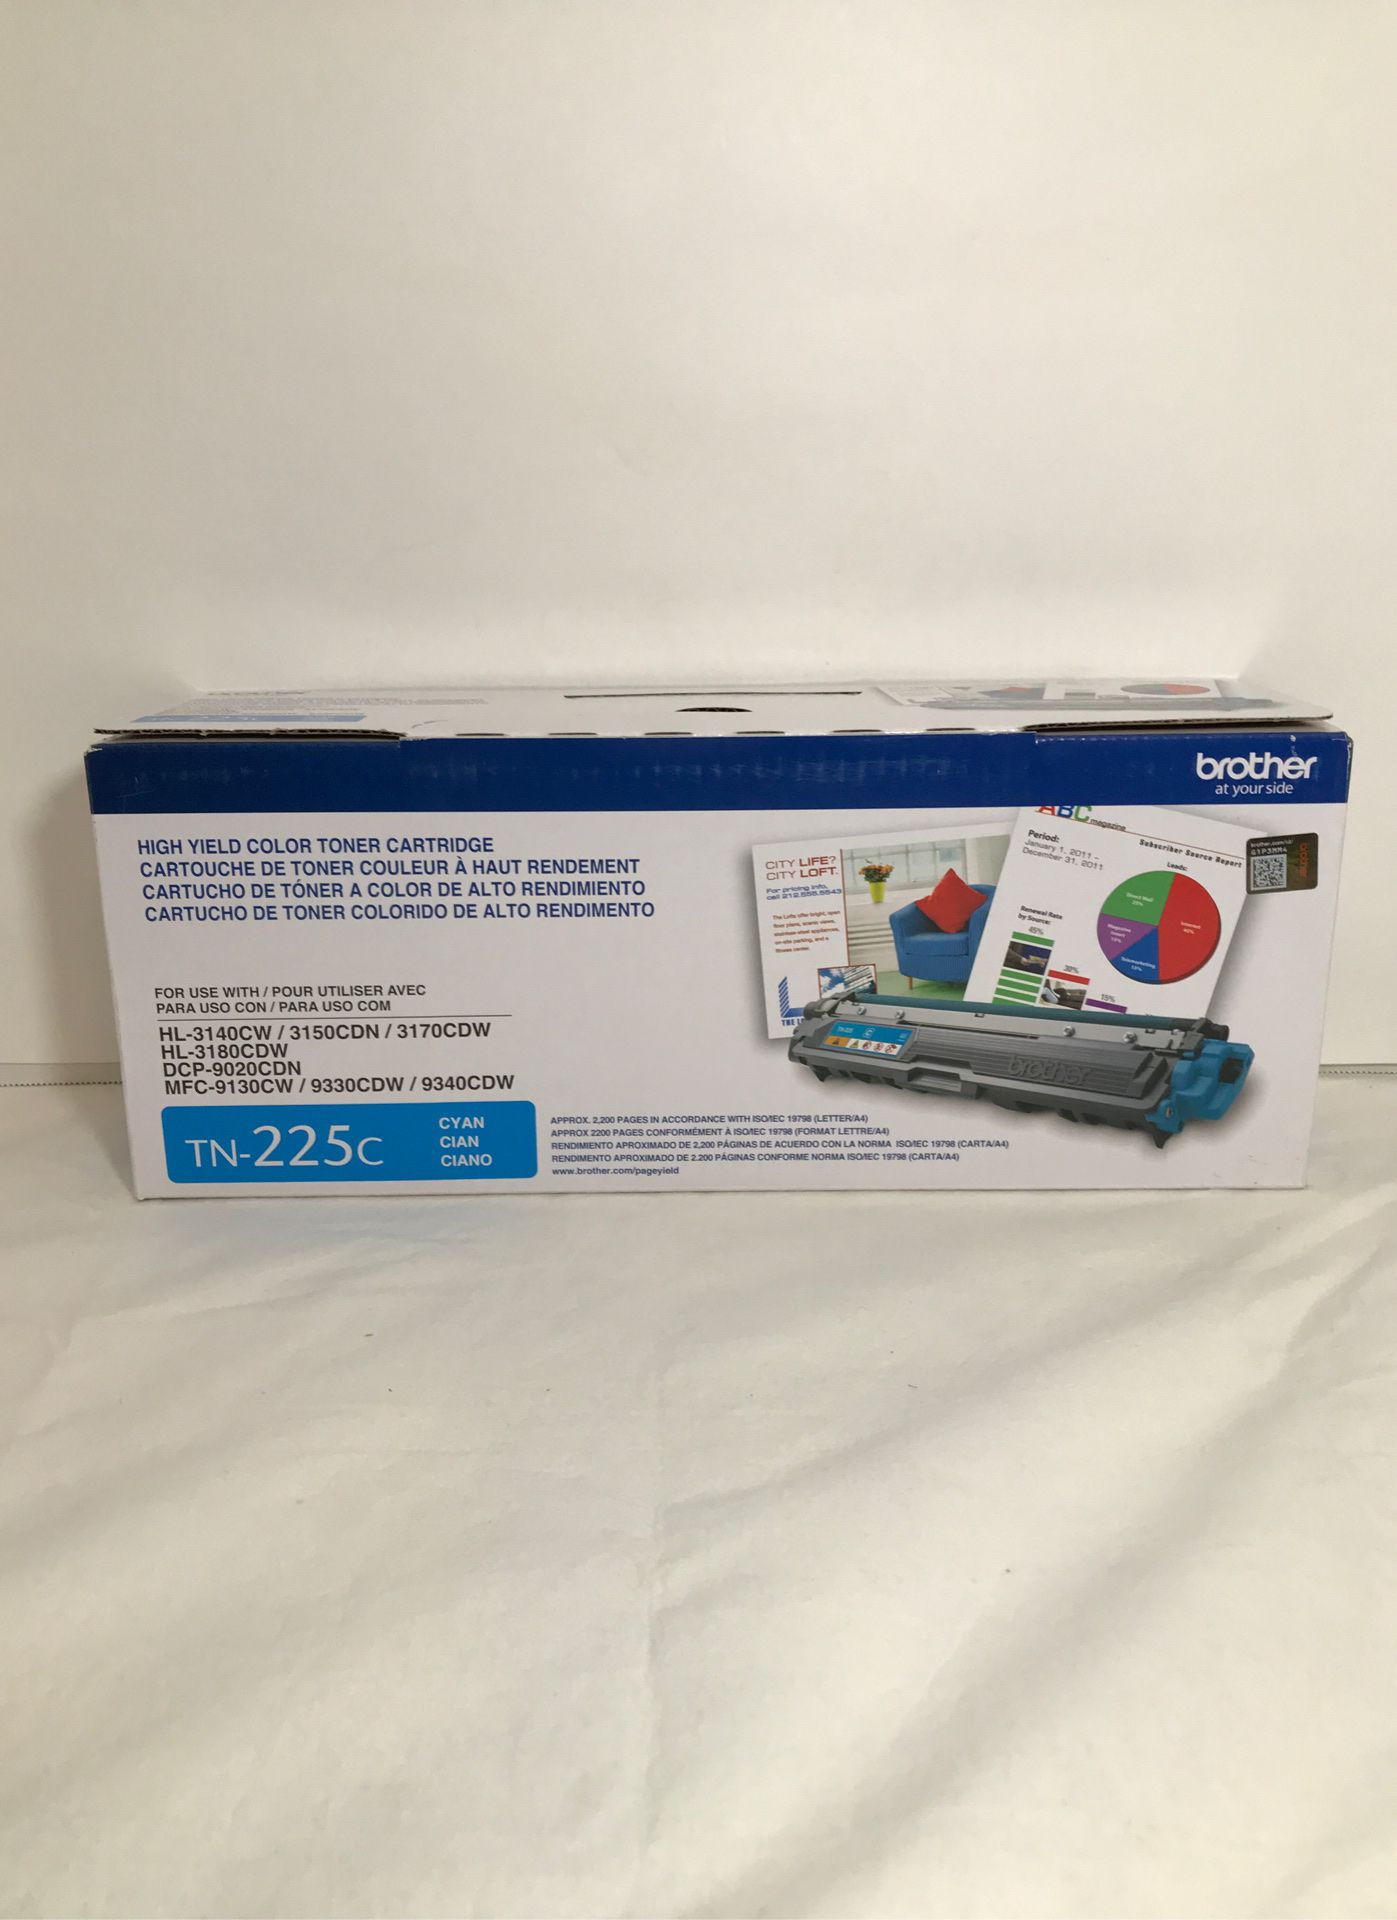 Brother OEM TN-225c Cyan Toner Cartridge New and Sealed